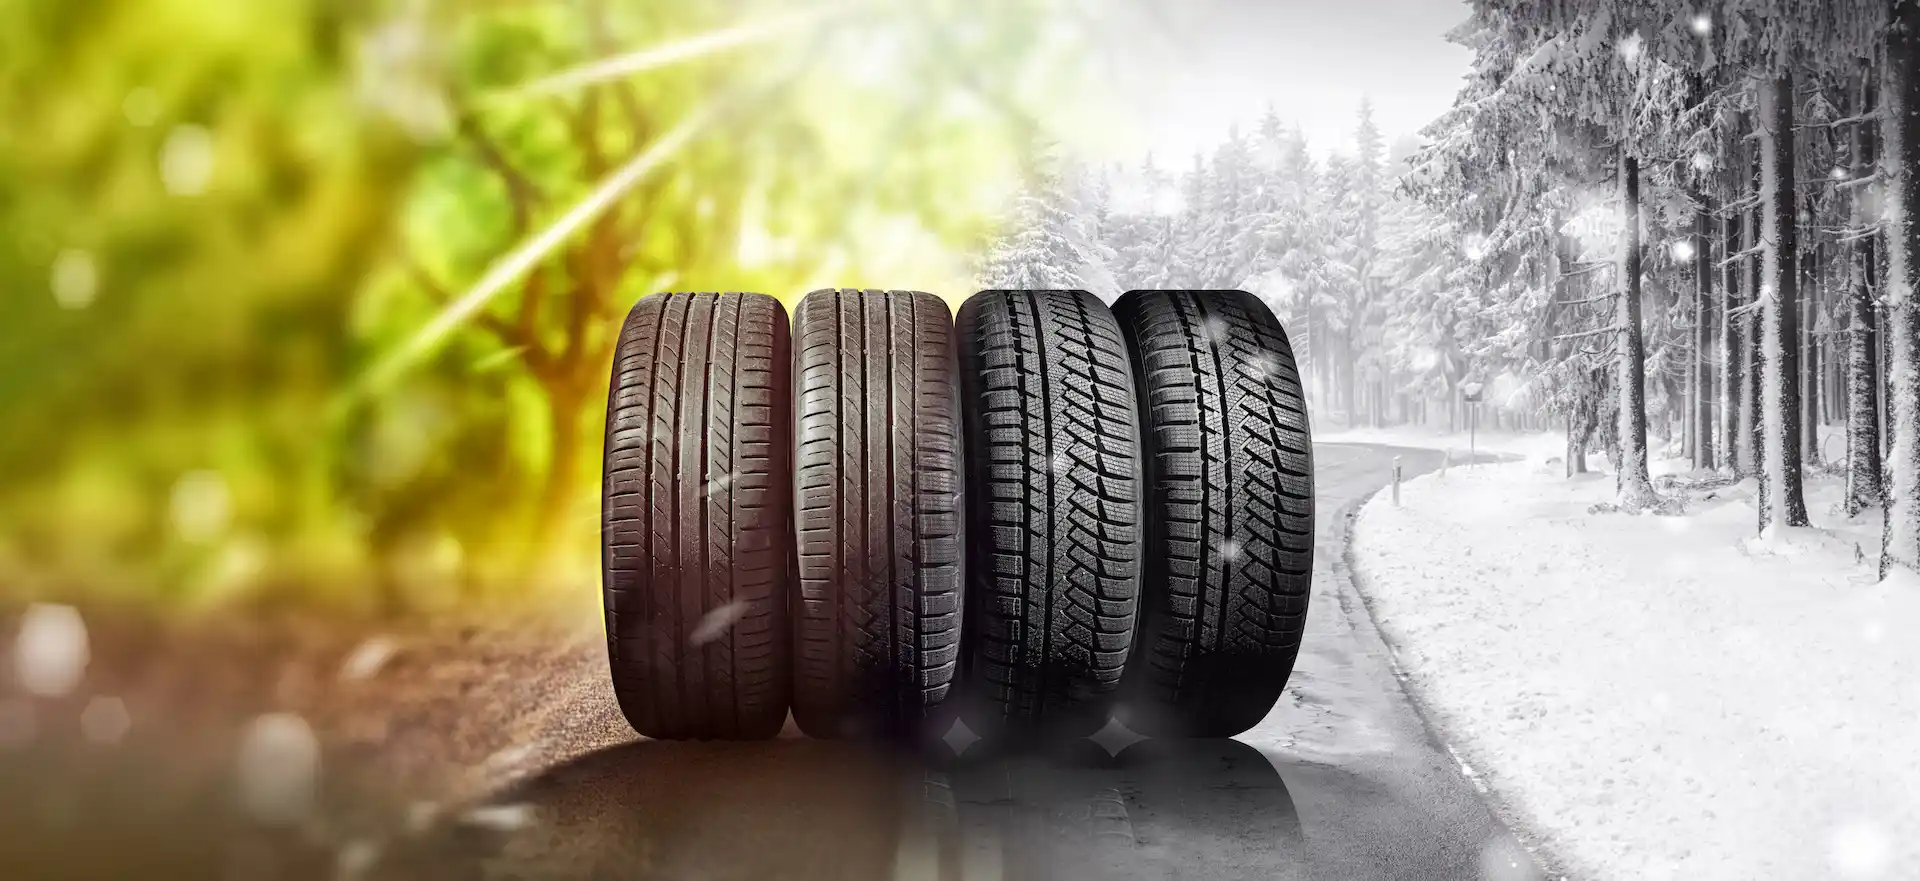 Summer and winter tyres are lined up on a road with cold weather on one side and warm weather on the other.